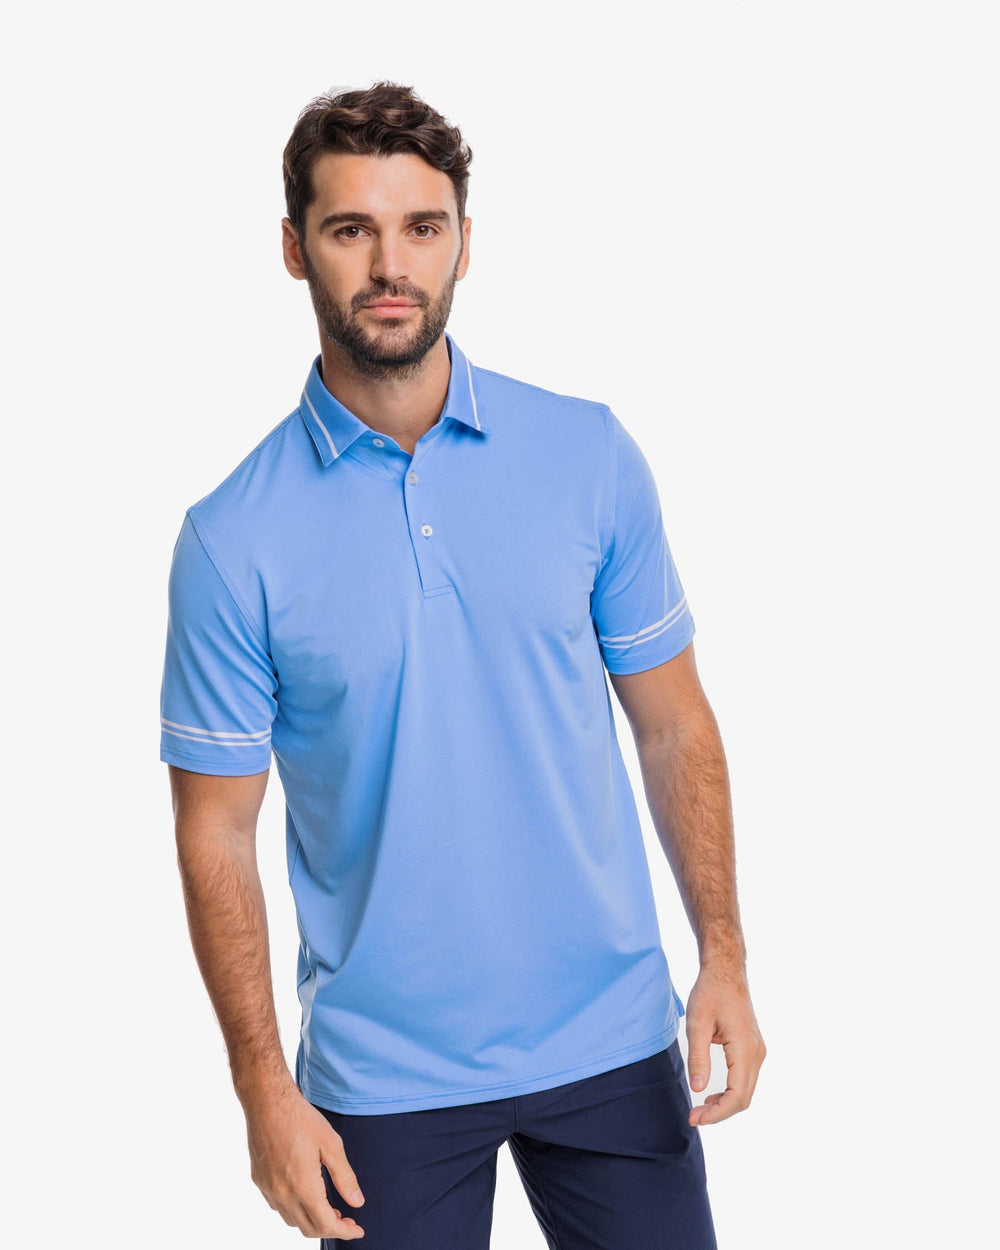 The front view of the Southern Tide Driver Brantley Stripe Performance Polo Shirt by Southern Tide - Boat Blue